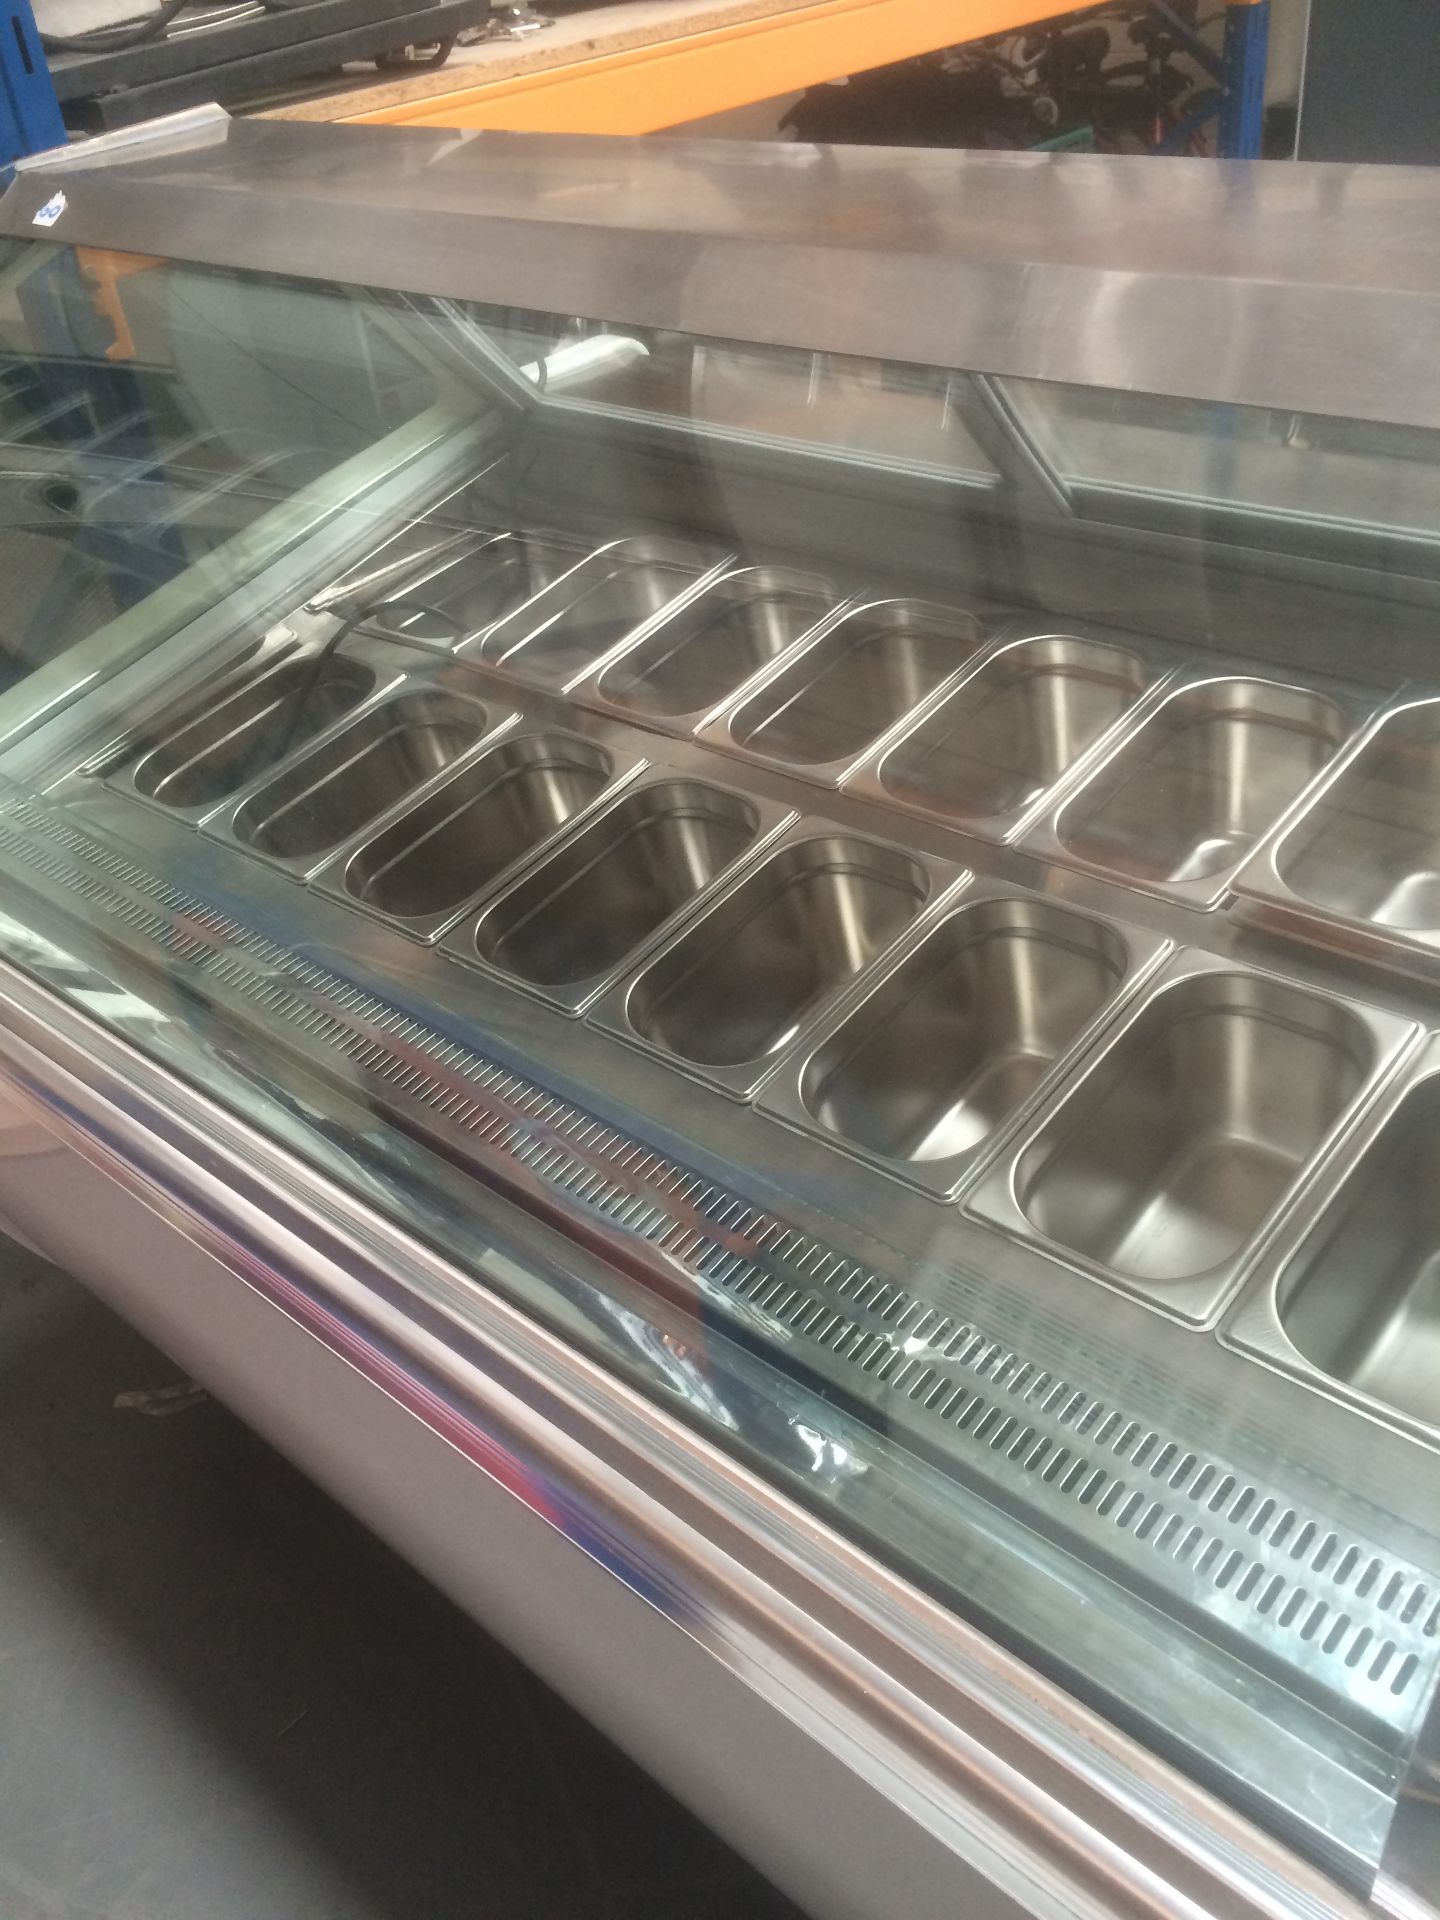 Ice cream serve over counter 16 pans 1500mm long curved glass on wheels - Image 2 of 5